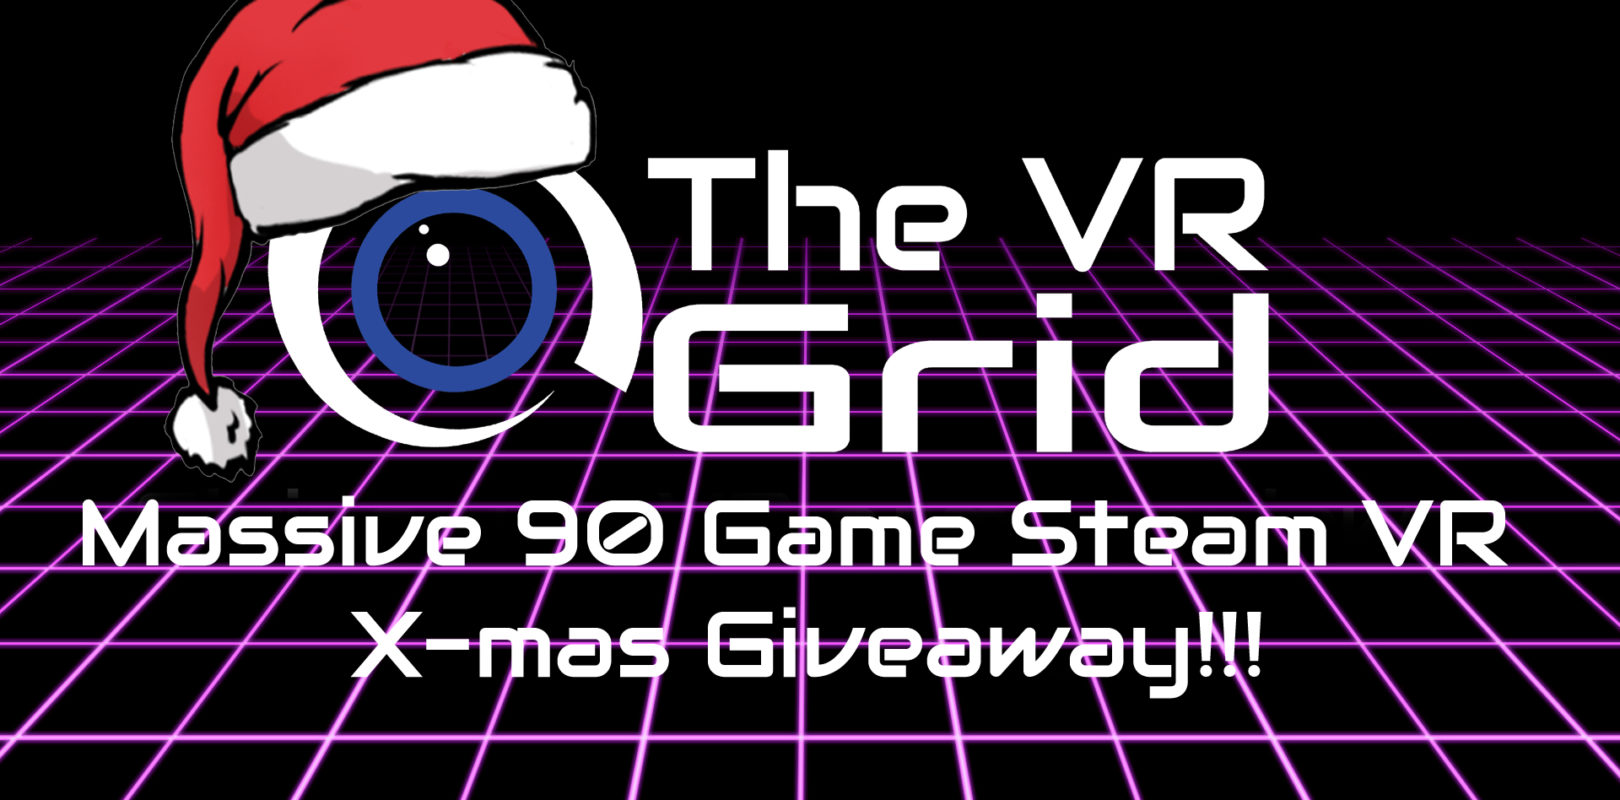 My 90 Game Steam VR giveaway!!! THE VR GRID